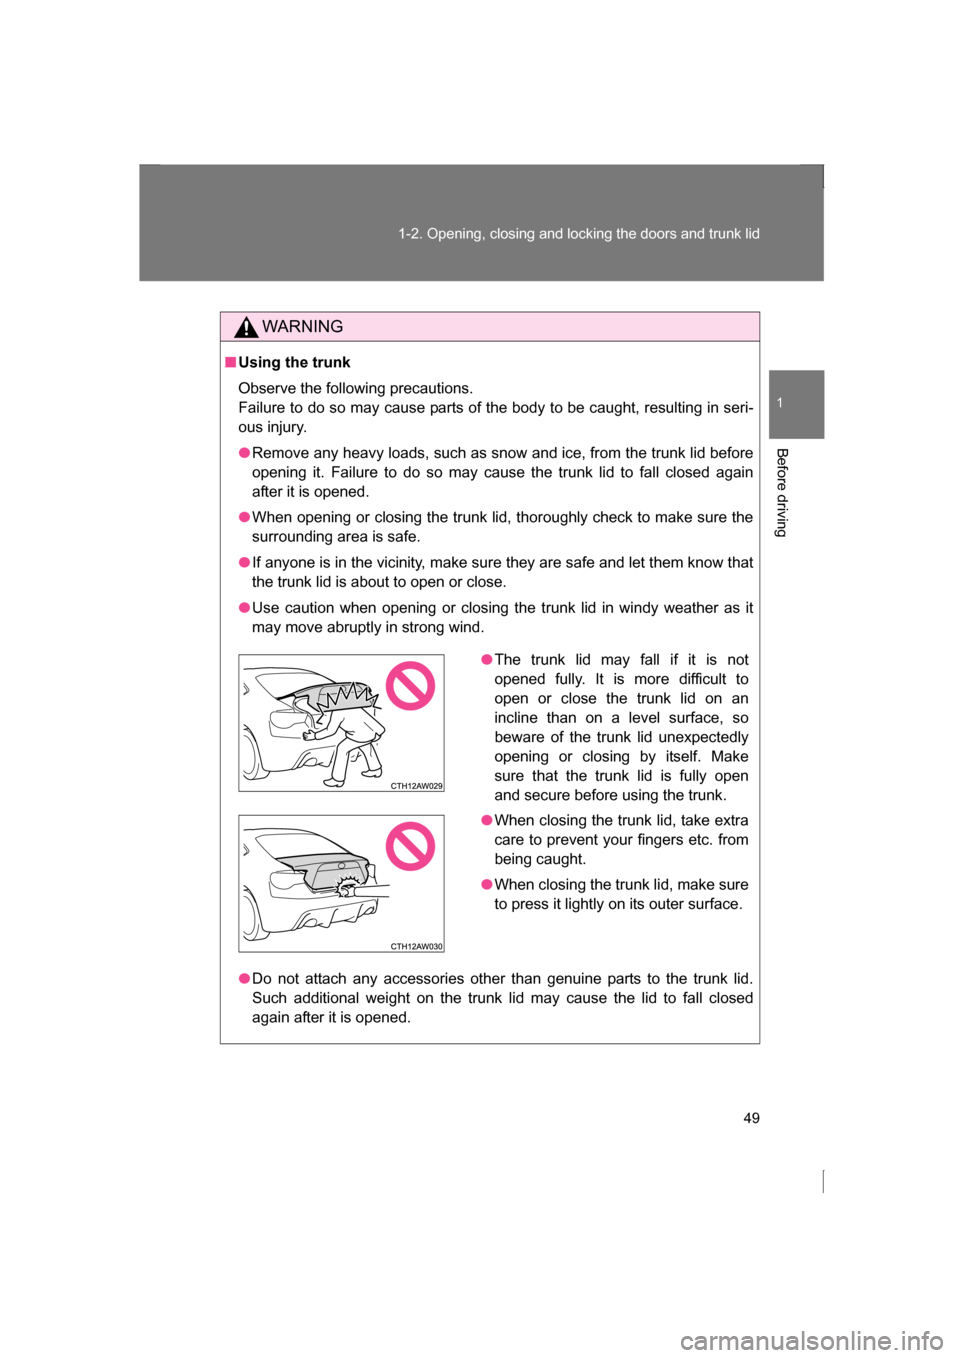 SUBARU BRZ 2013 1.G User Guide 49
1-2. Opening, closing and locking the doors and trunk lid
1
Before driving
WARNING
■Using the trunk 
Observe the following precautions.  
Failure to do so may cause parts of the body to be caught